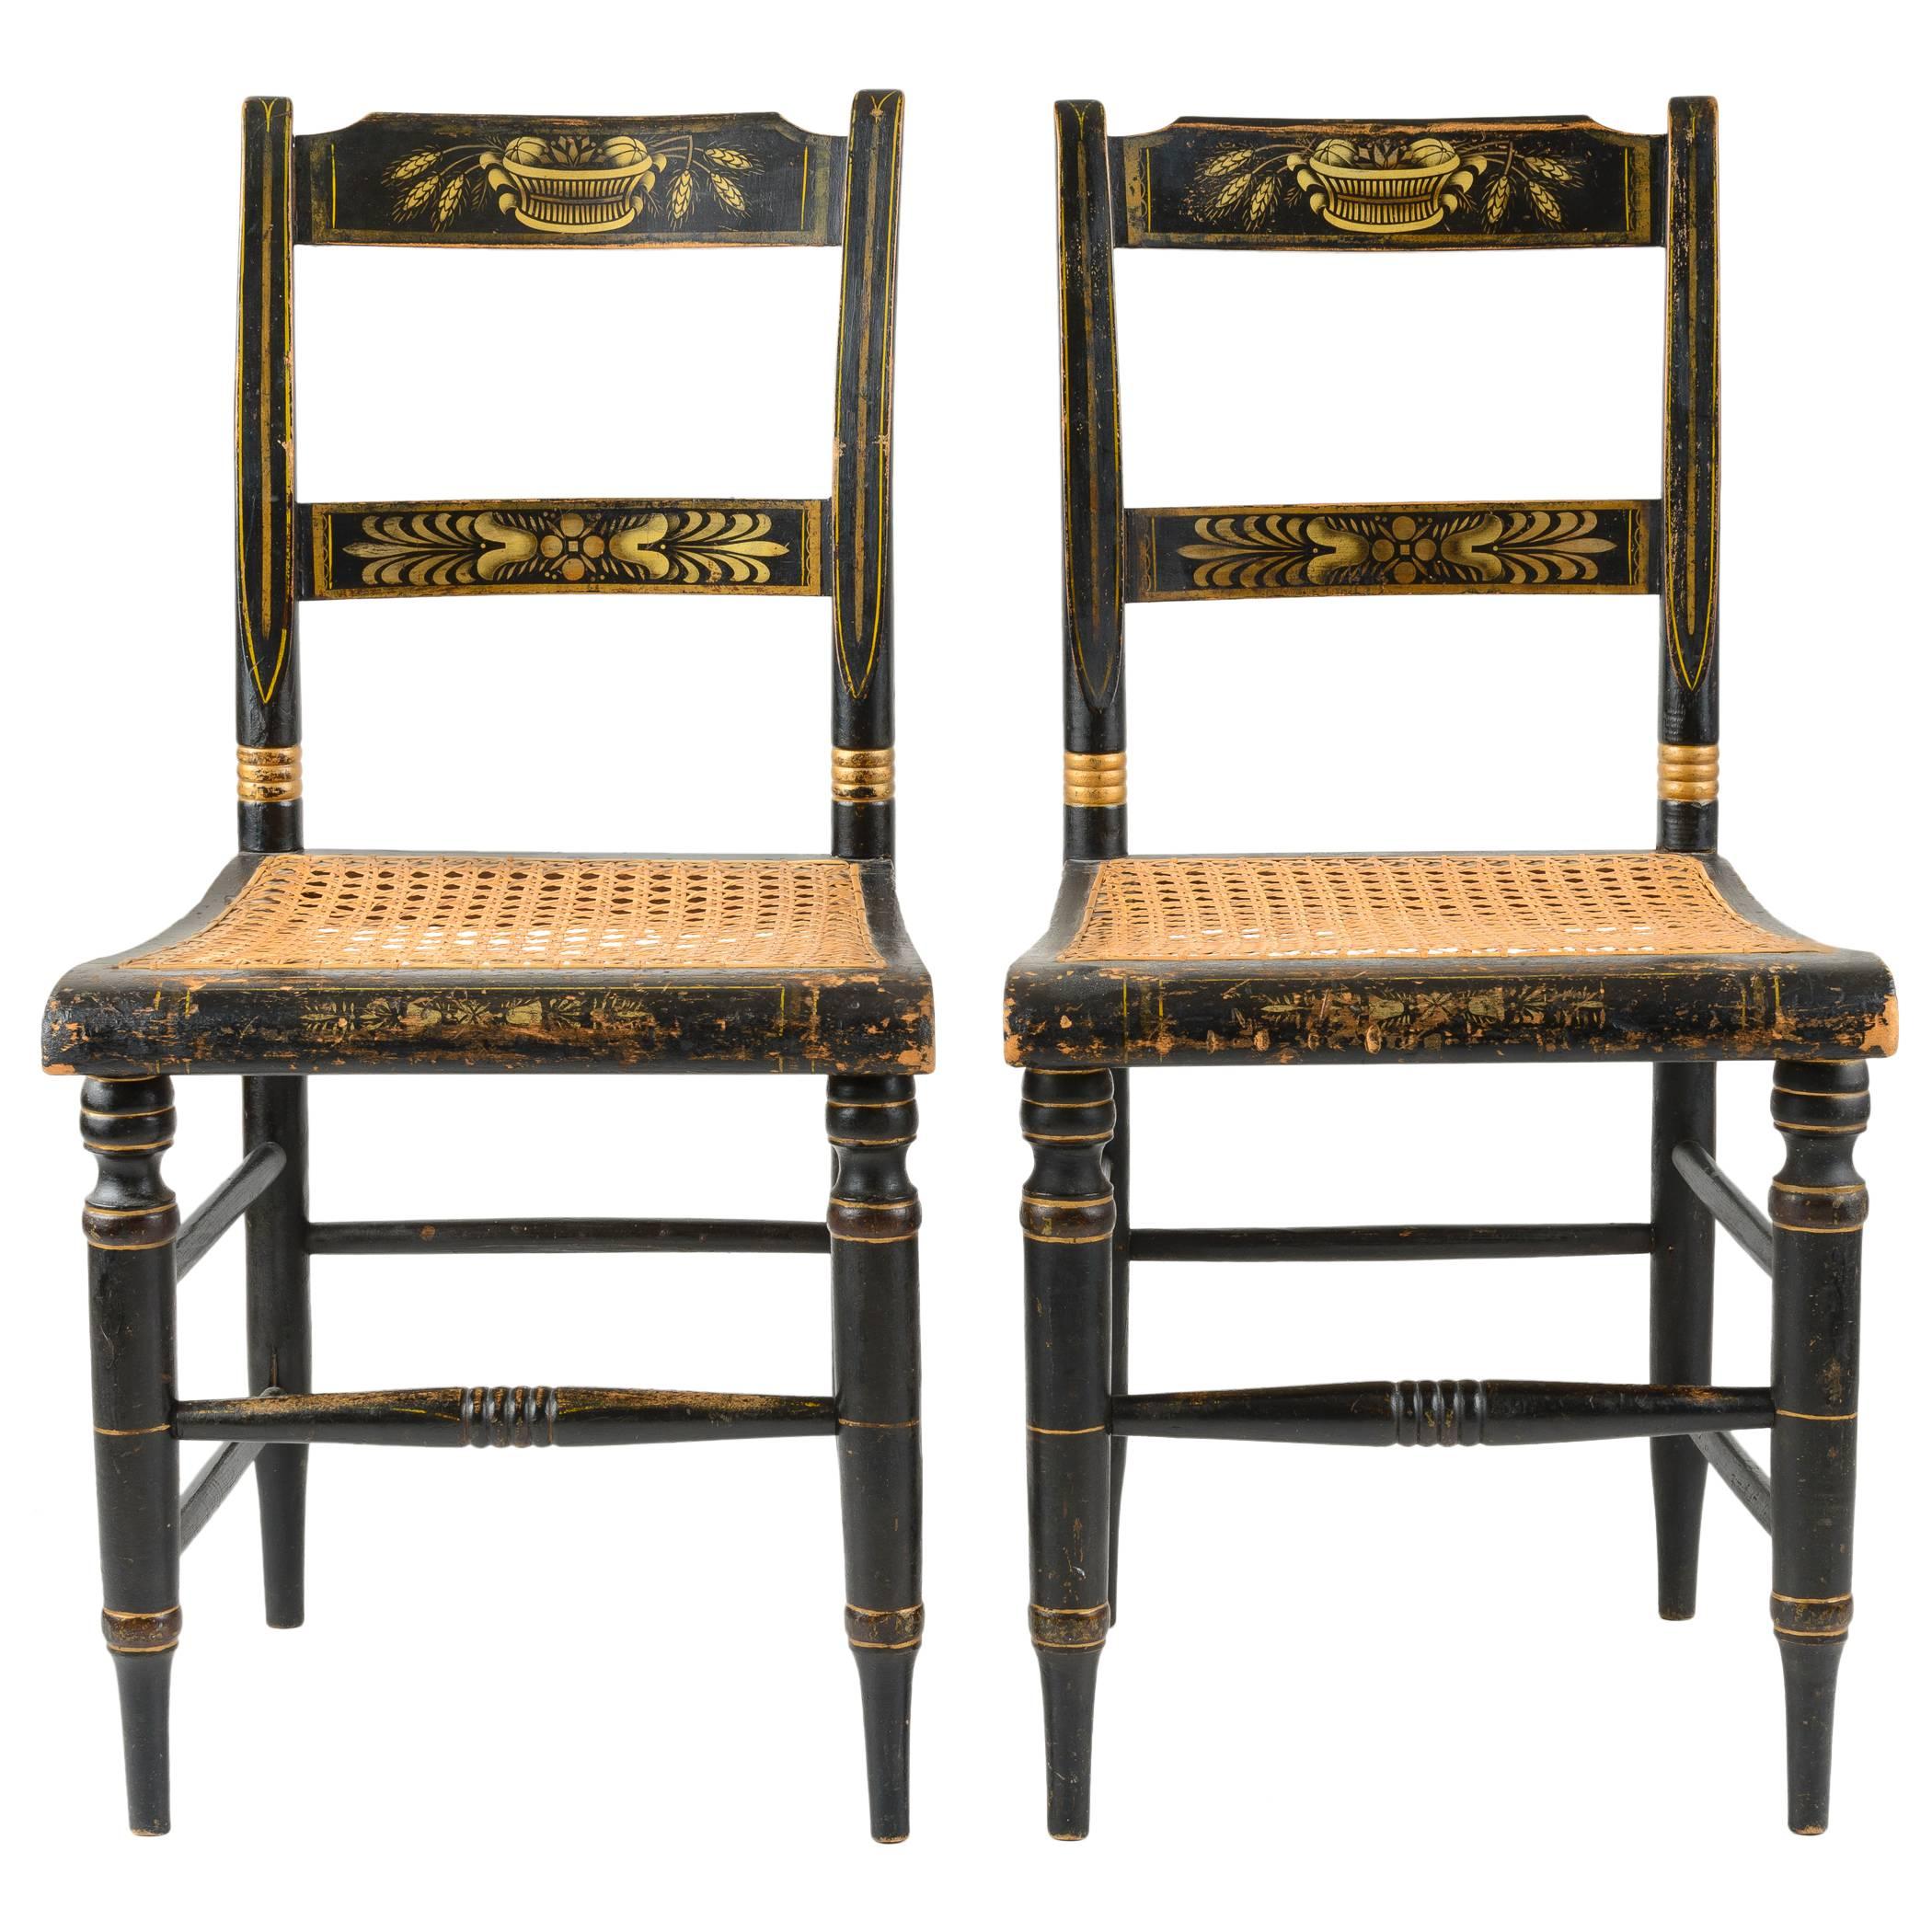 Pair of American Painted New England Side Chairs with Cane Seats